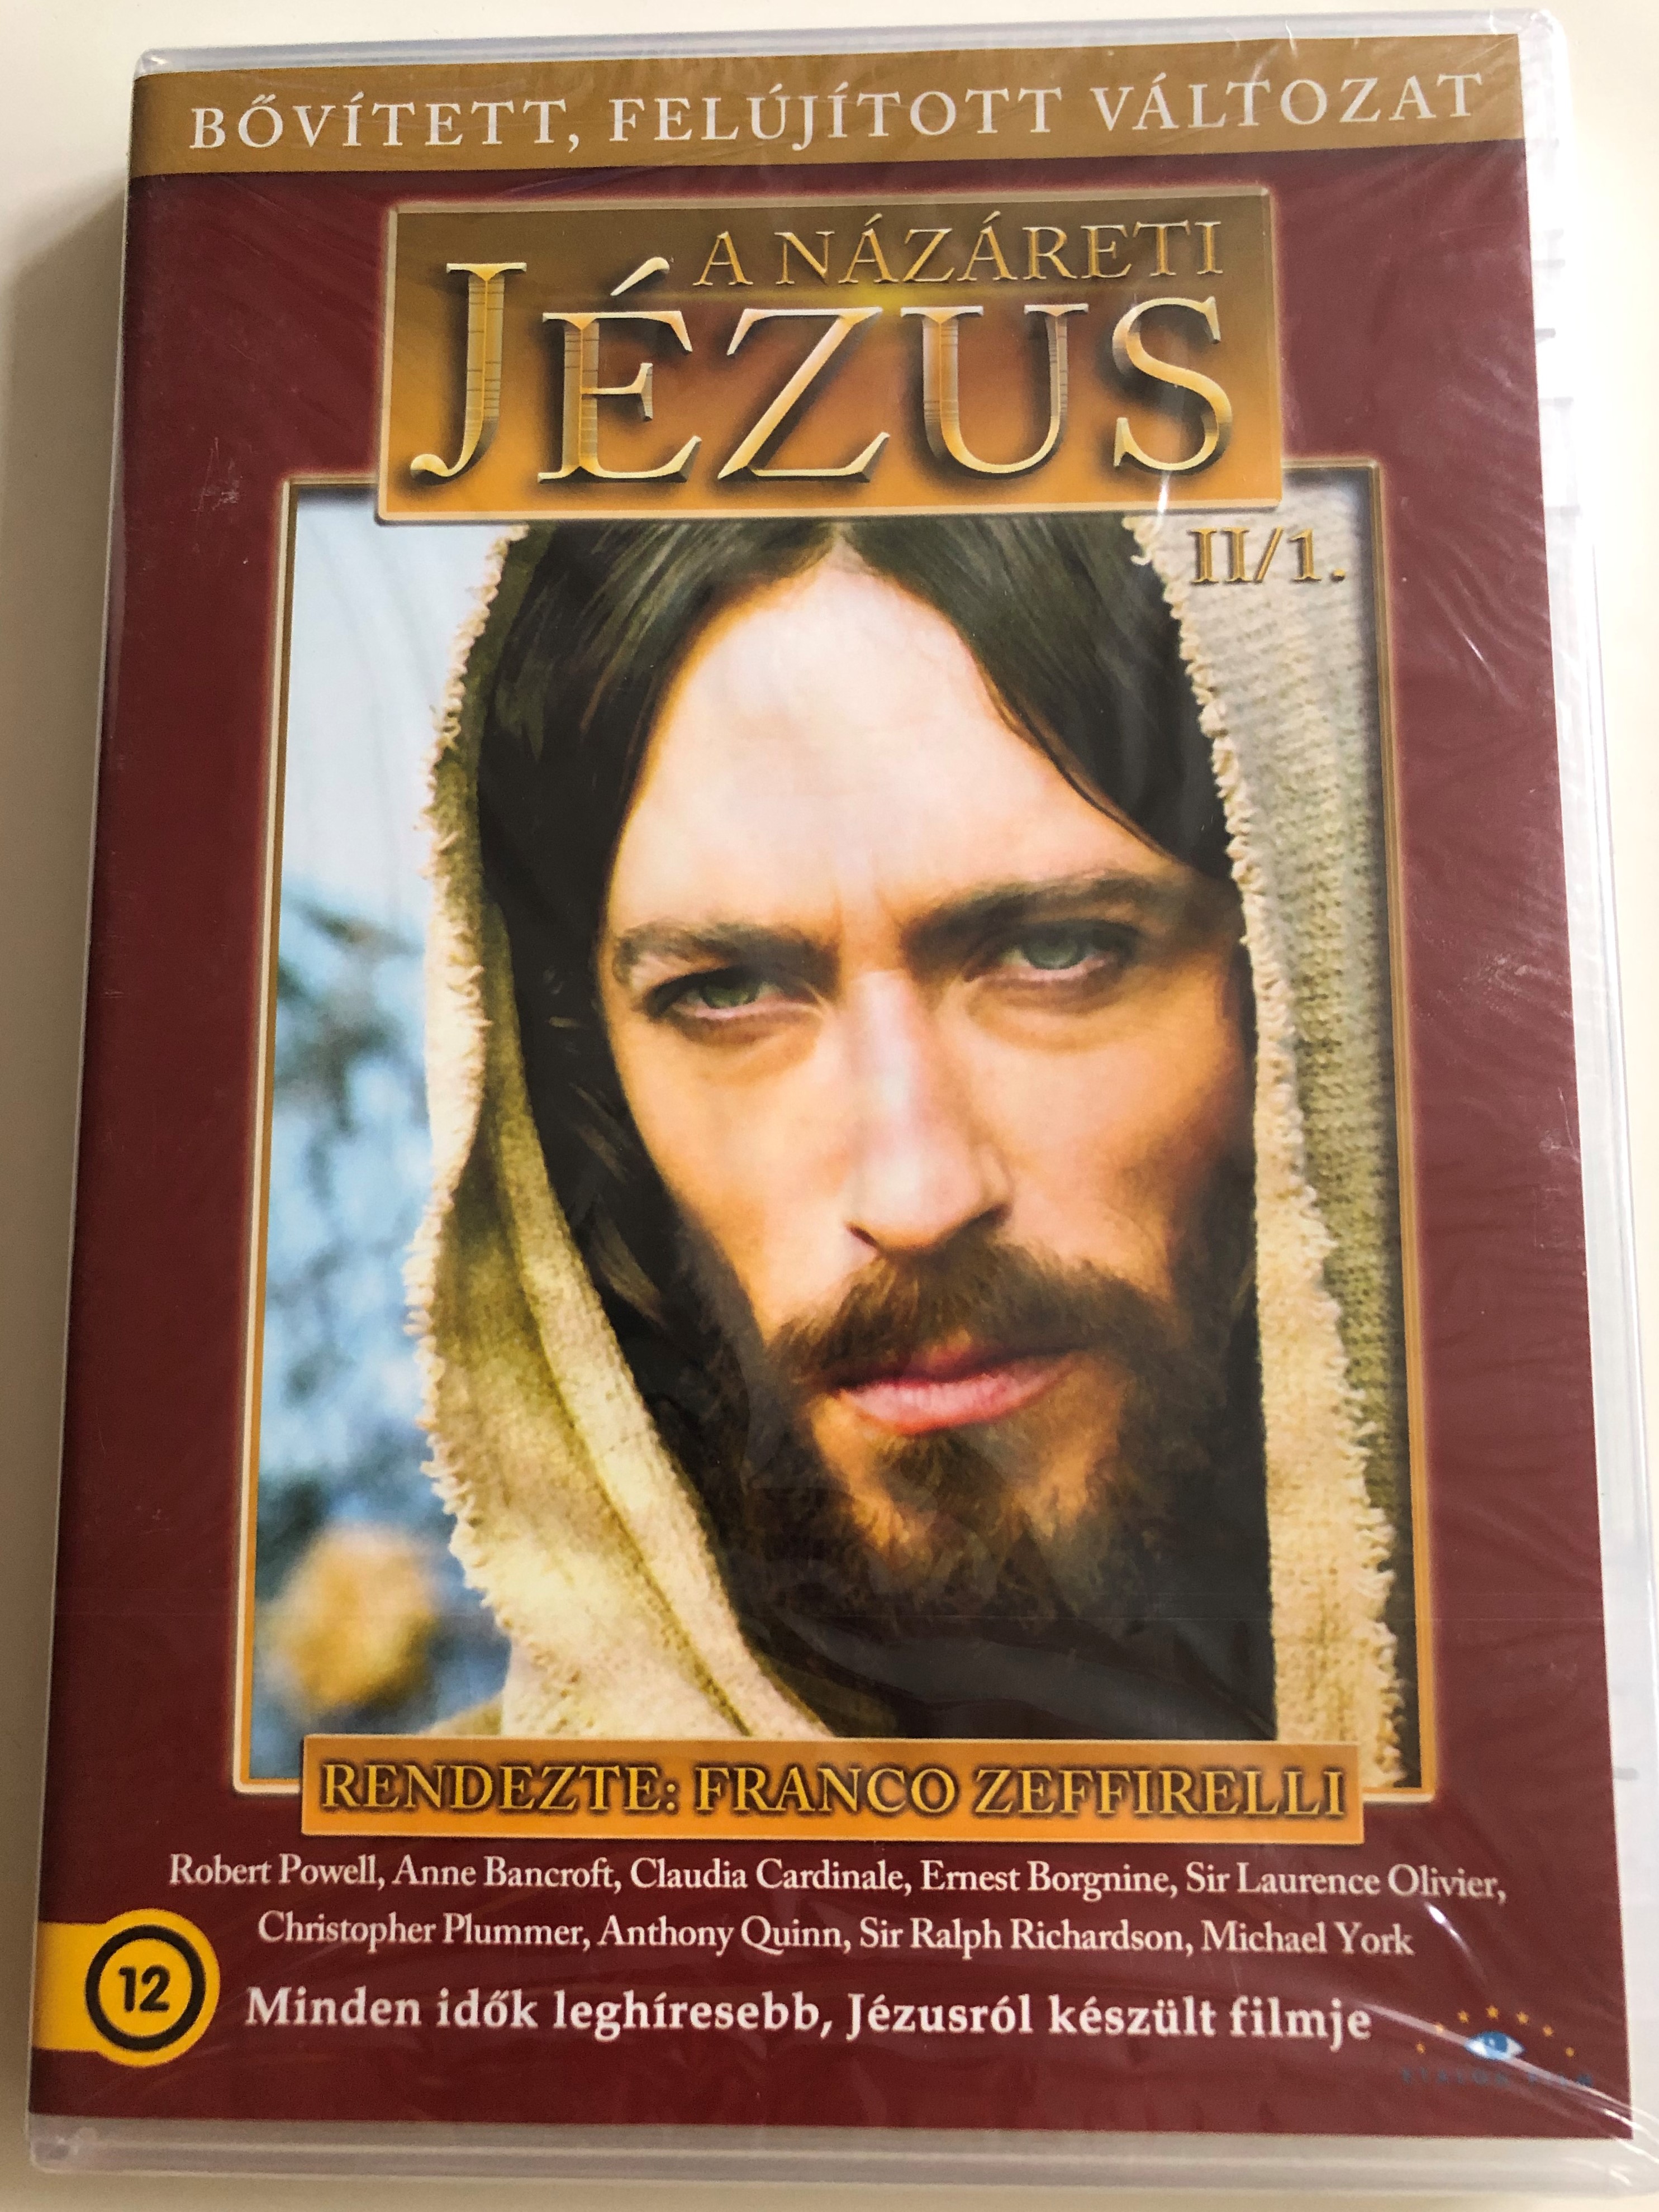 jesus-of-nazareth-ii1.-dvd-1977-a-n-z-reti-j-zus-directed-by-franco-zeffirelli-starring-robert-powell-anne-bancroft-claudia-cardinale-valentina-cortese-ian-mcshane-sir-laurence-olivier-extended-remastered-edition-1-.jpg